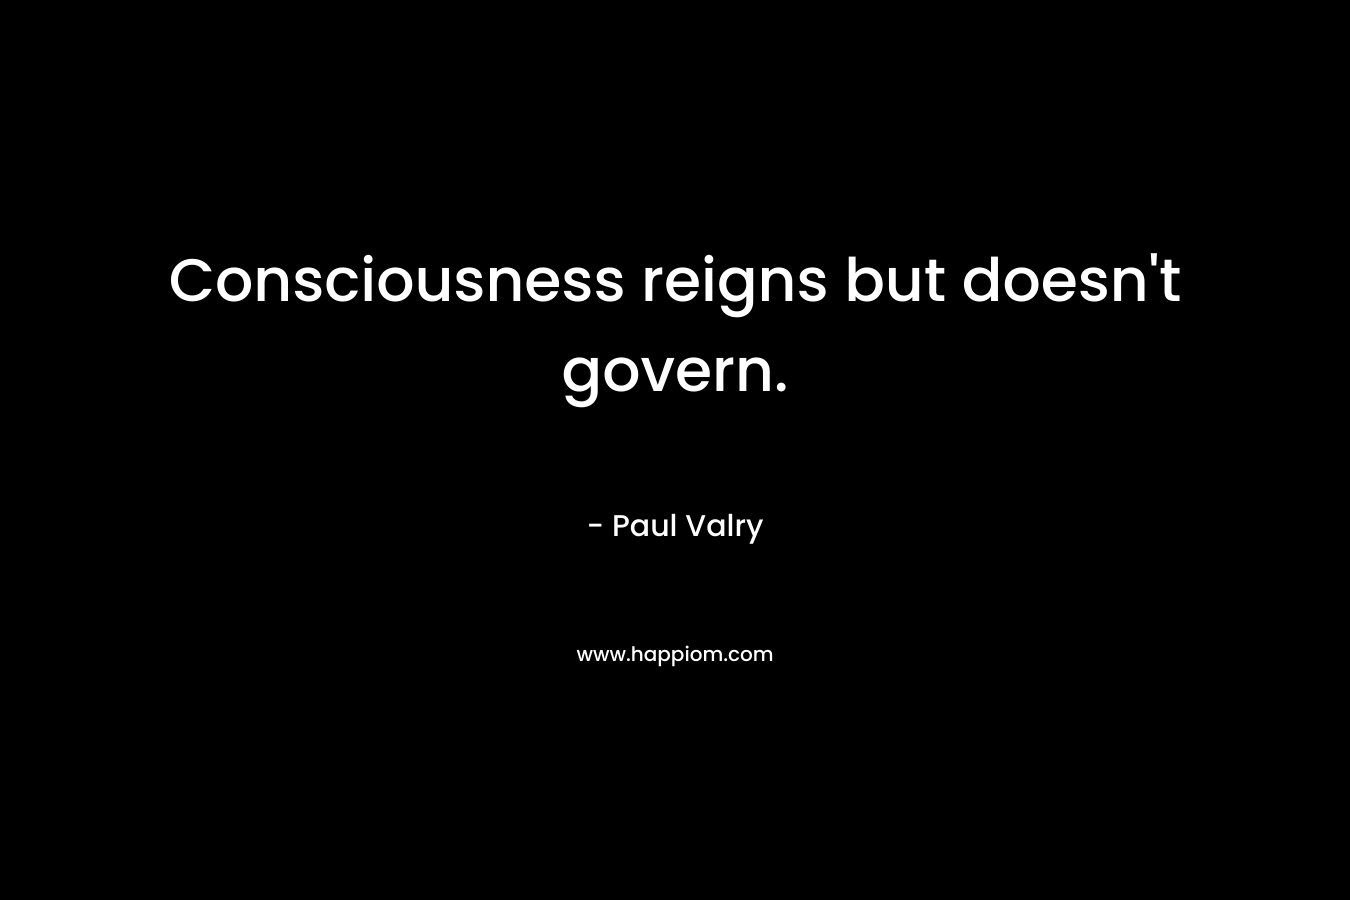 Consciousness reigns but doesn't govern.